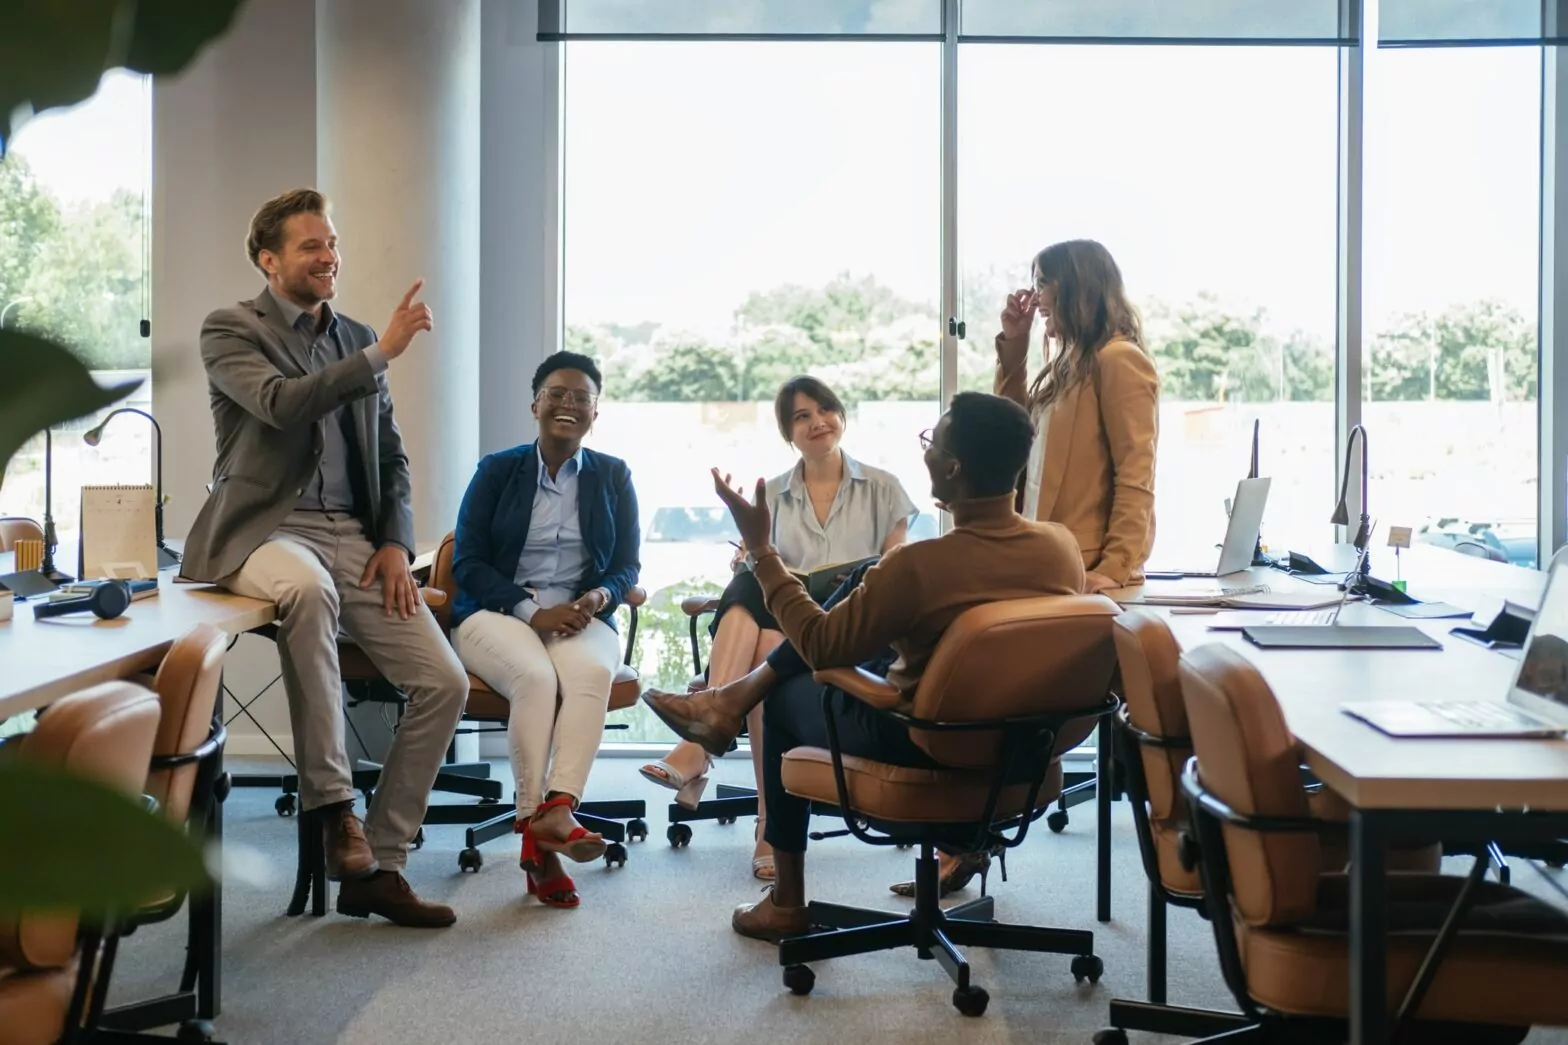 Top 3 Ways to Create a Work Culture That Brings Out the Best in Employees